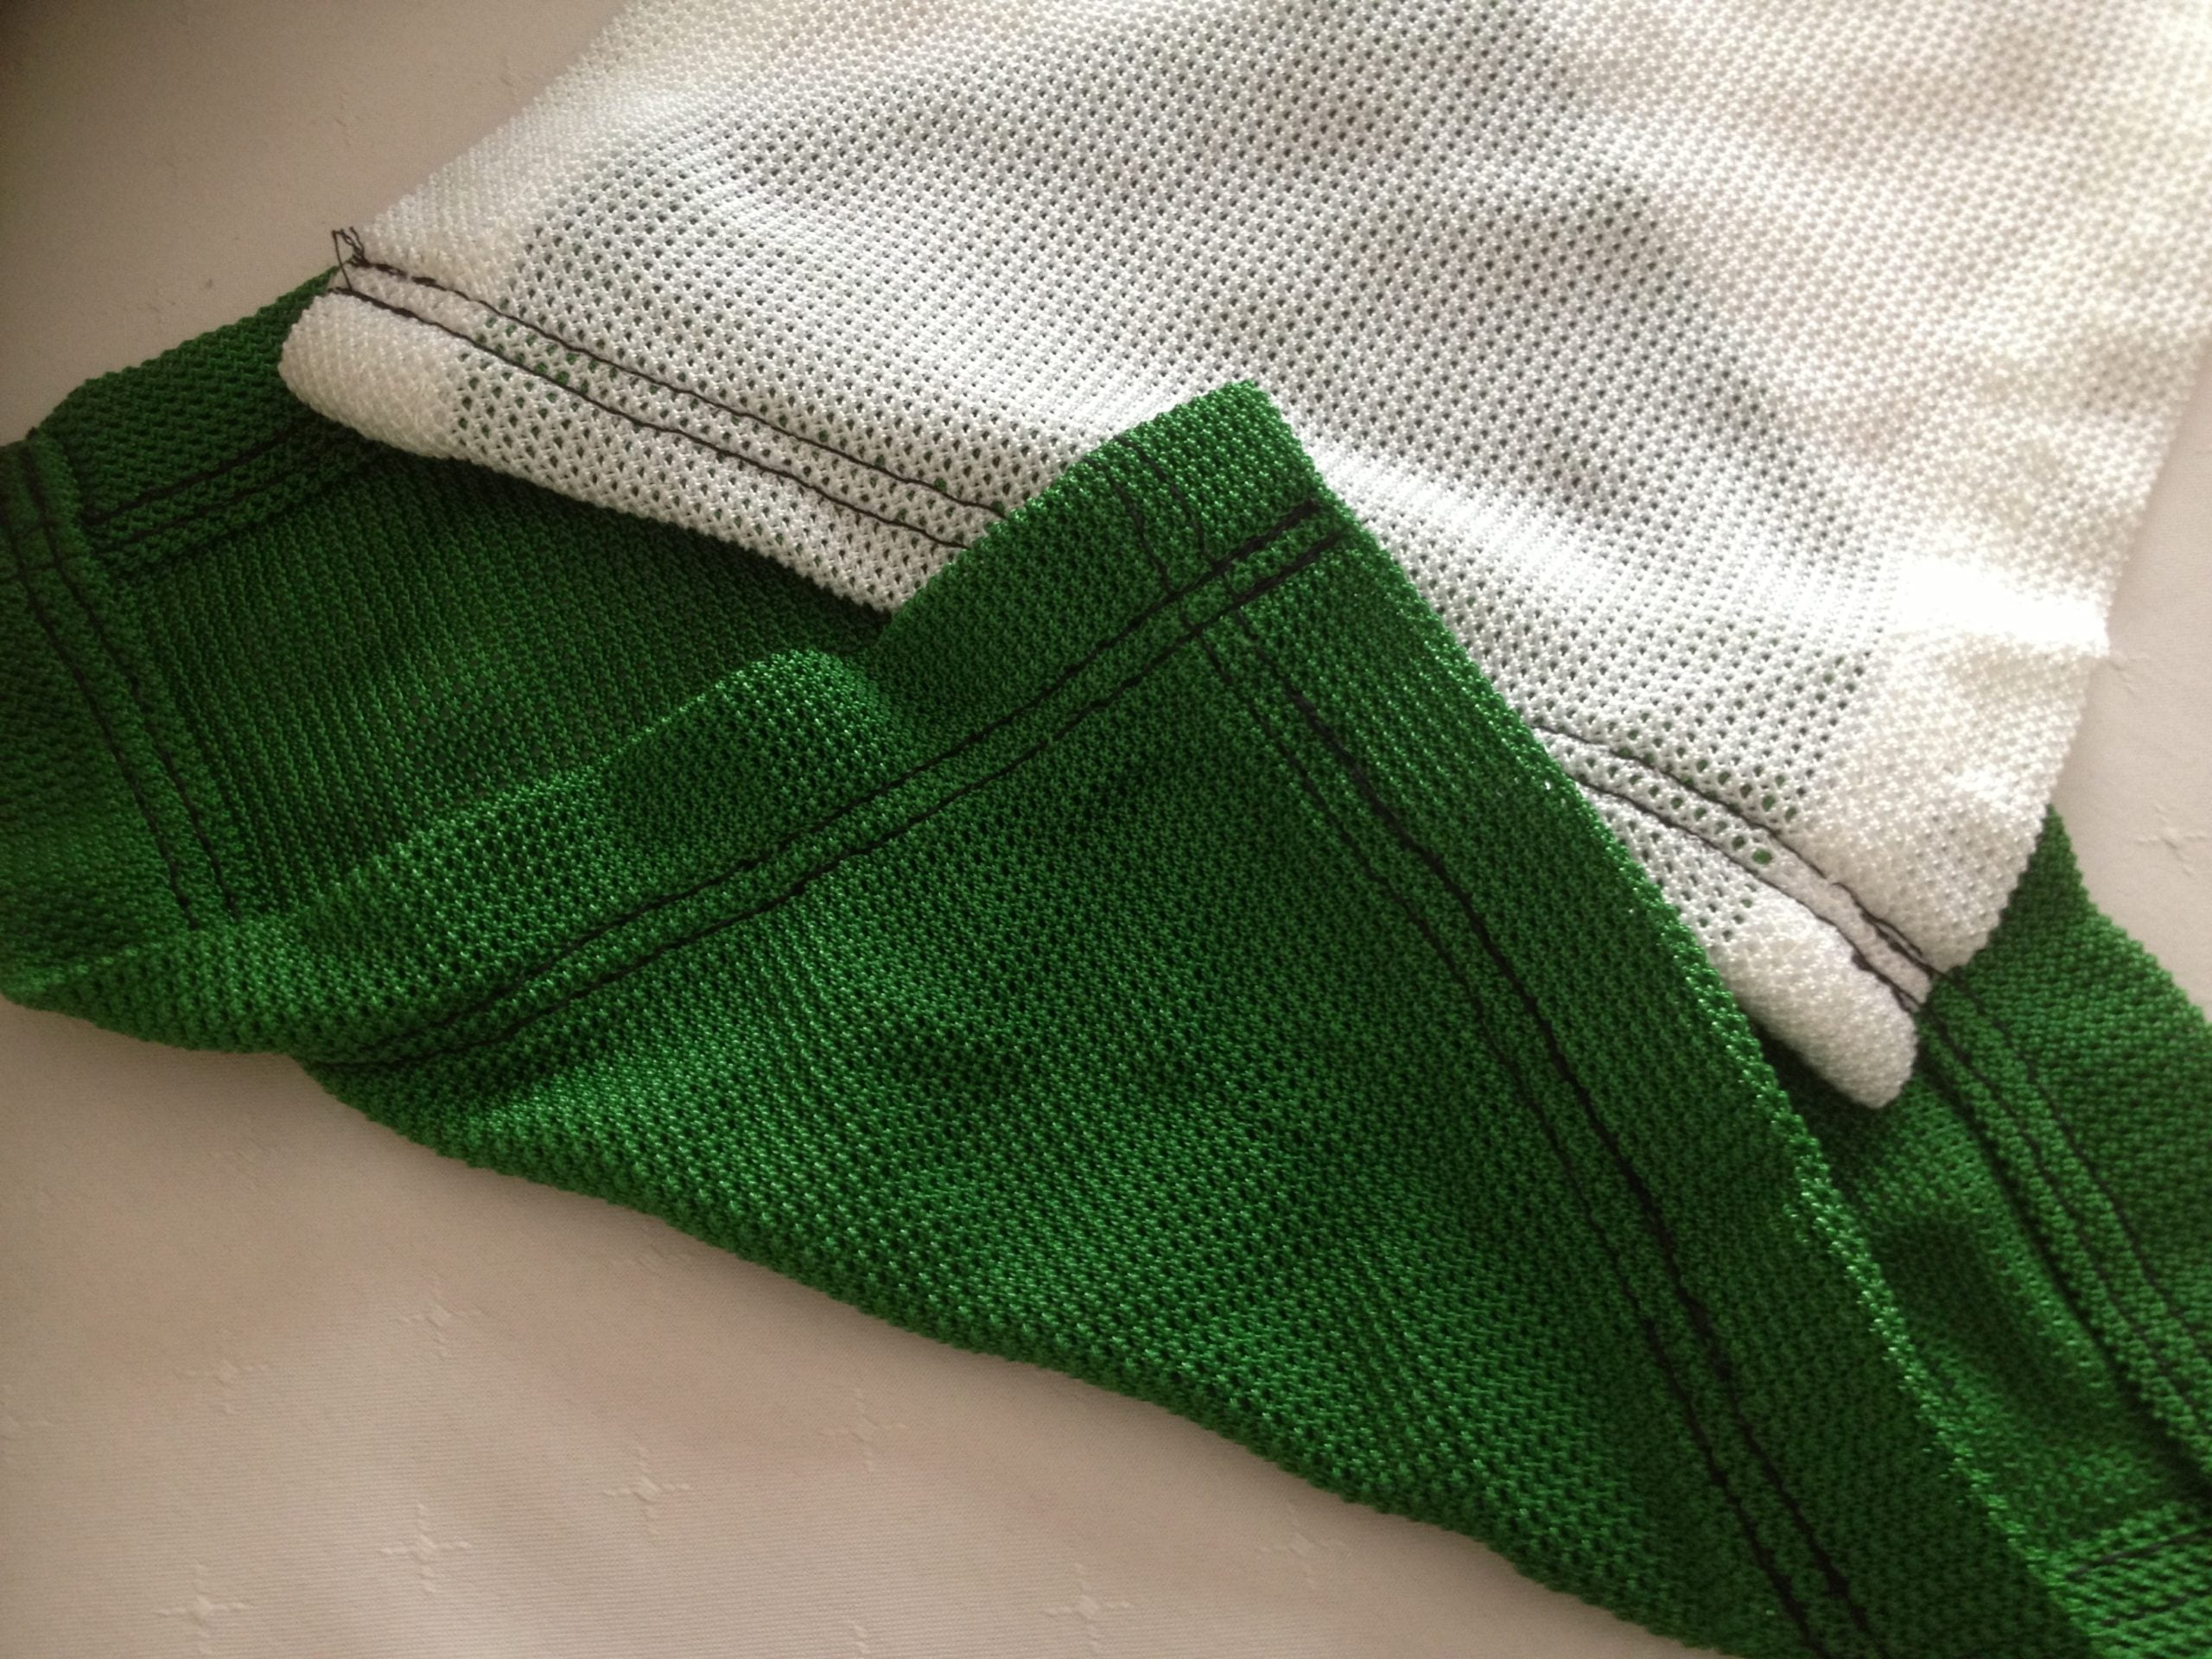 Archery and Golf impact Nets made to measure in green or white